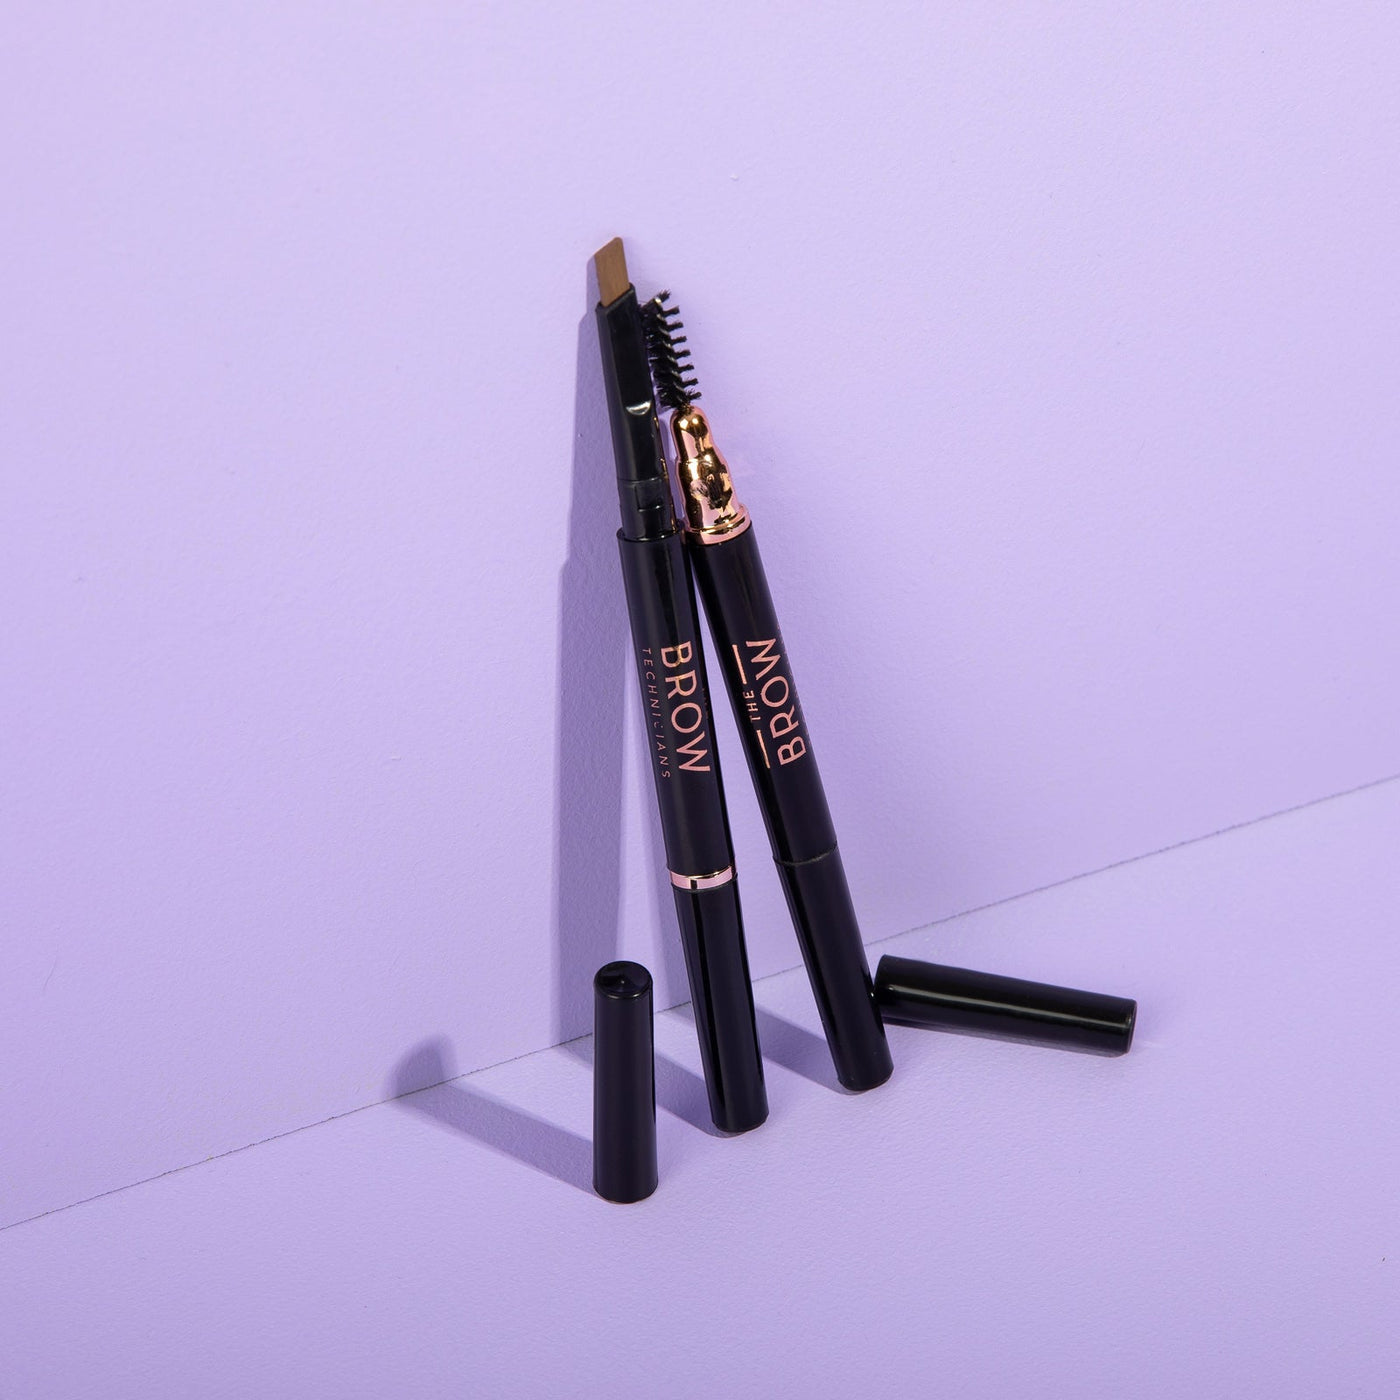 The Brow Technicians Brow Wow Waterproof Pencil styled